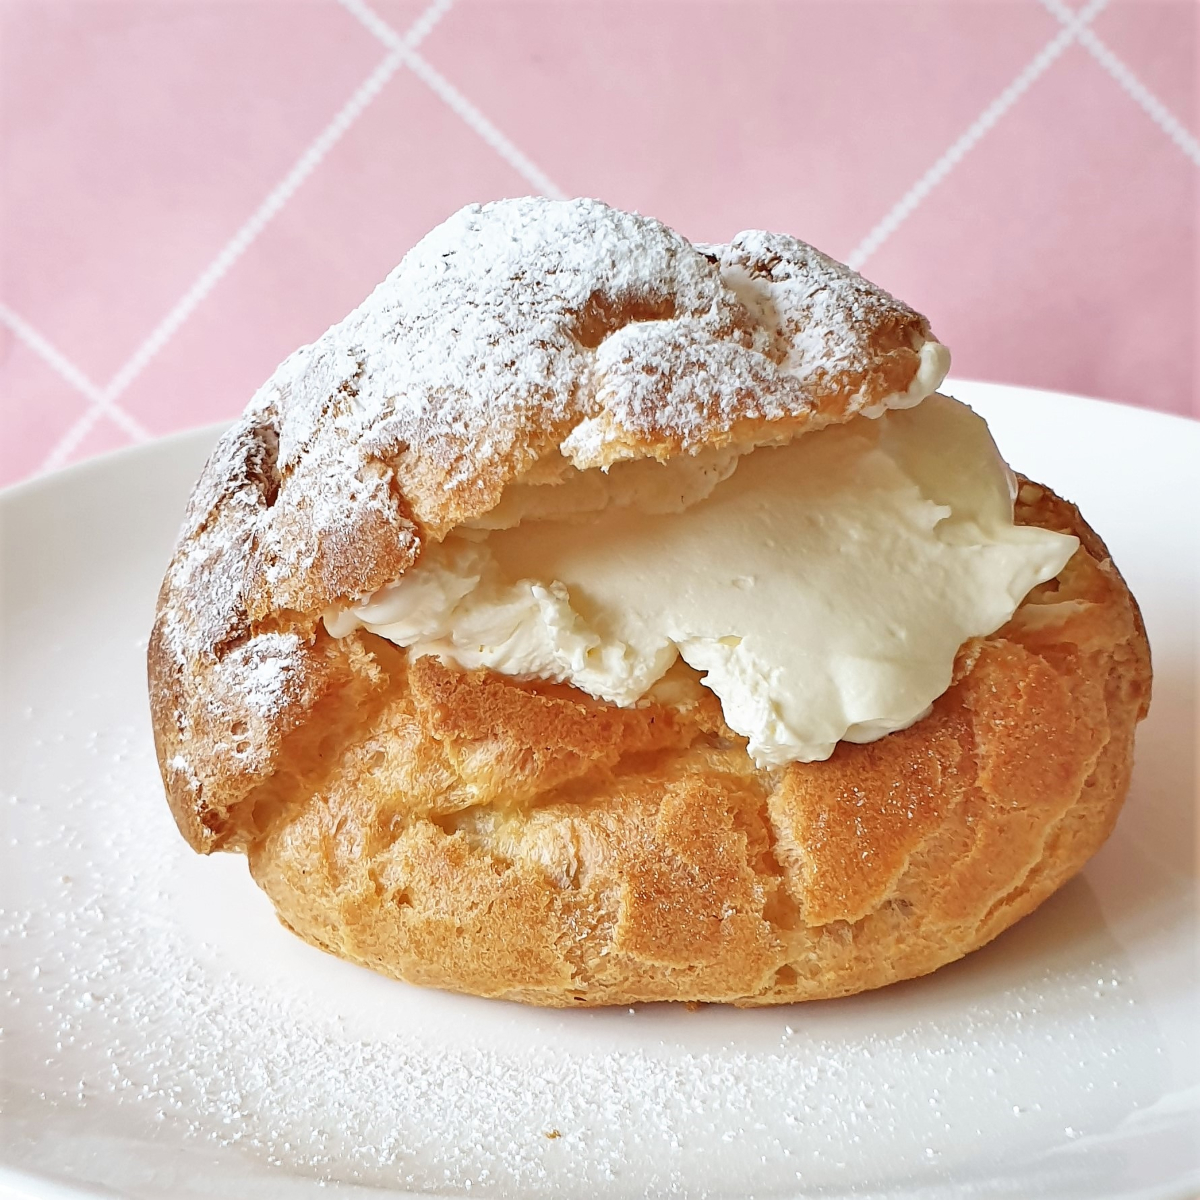 A cream puff filled with cream on a plate.